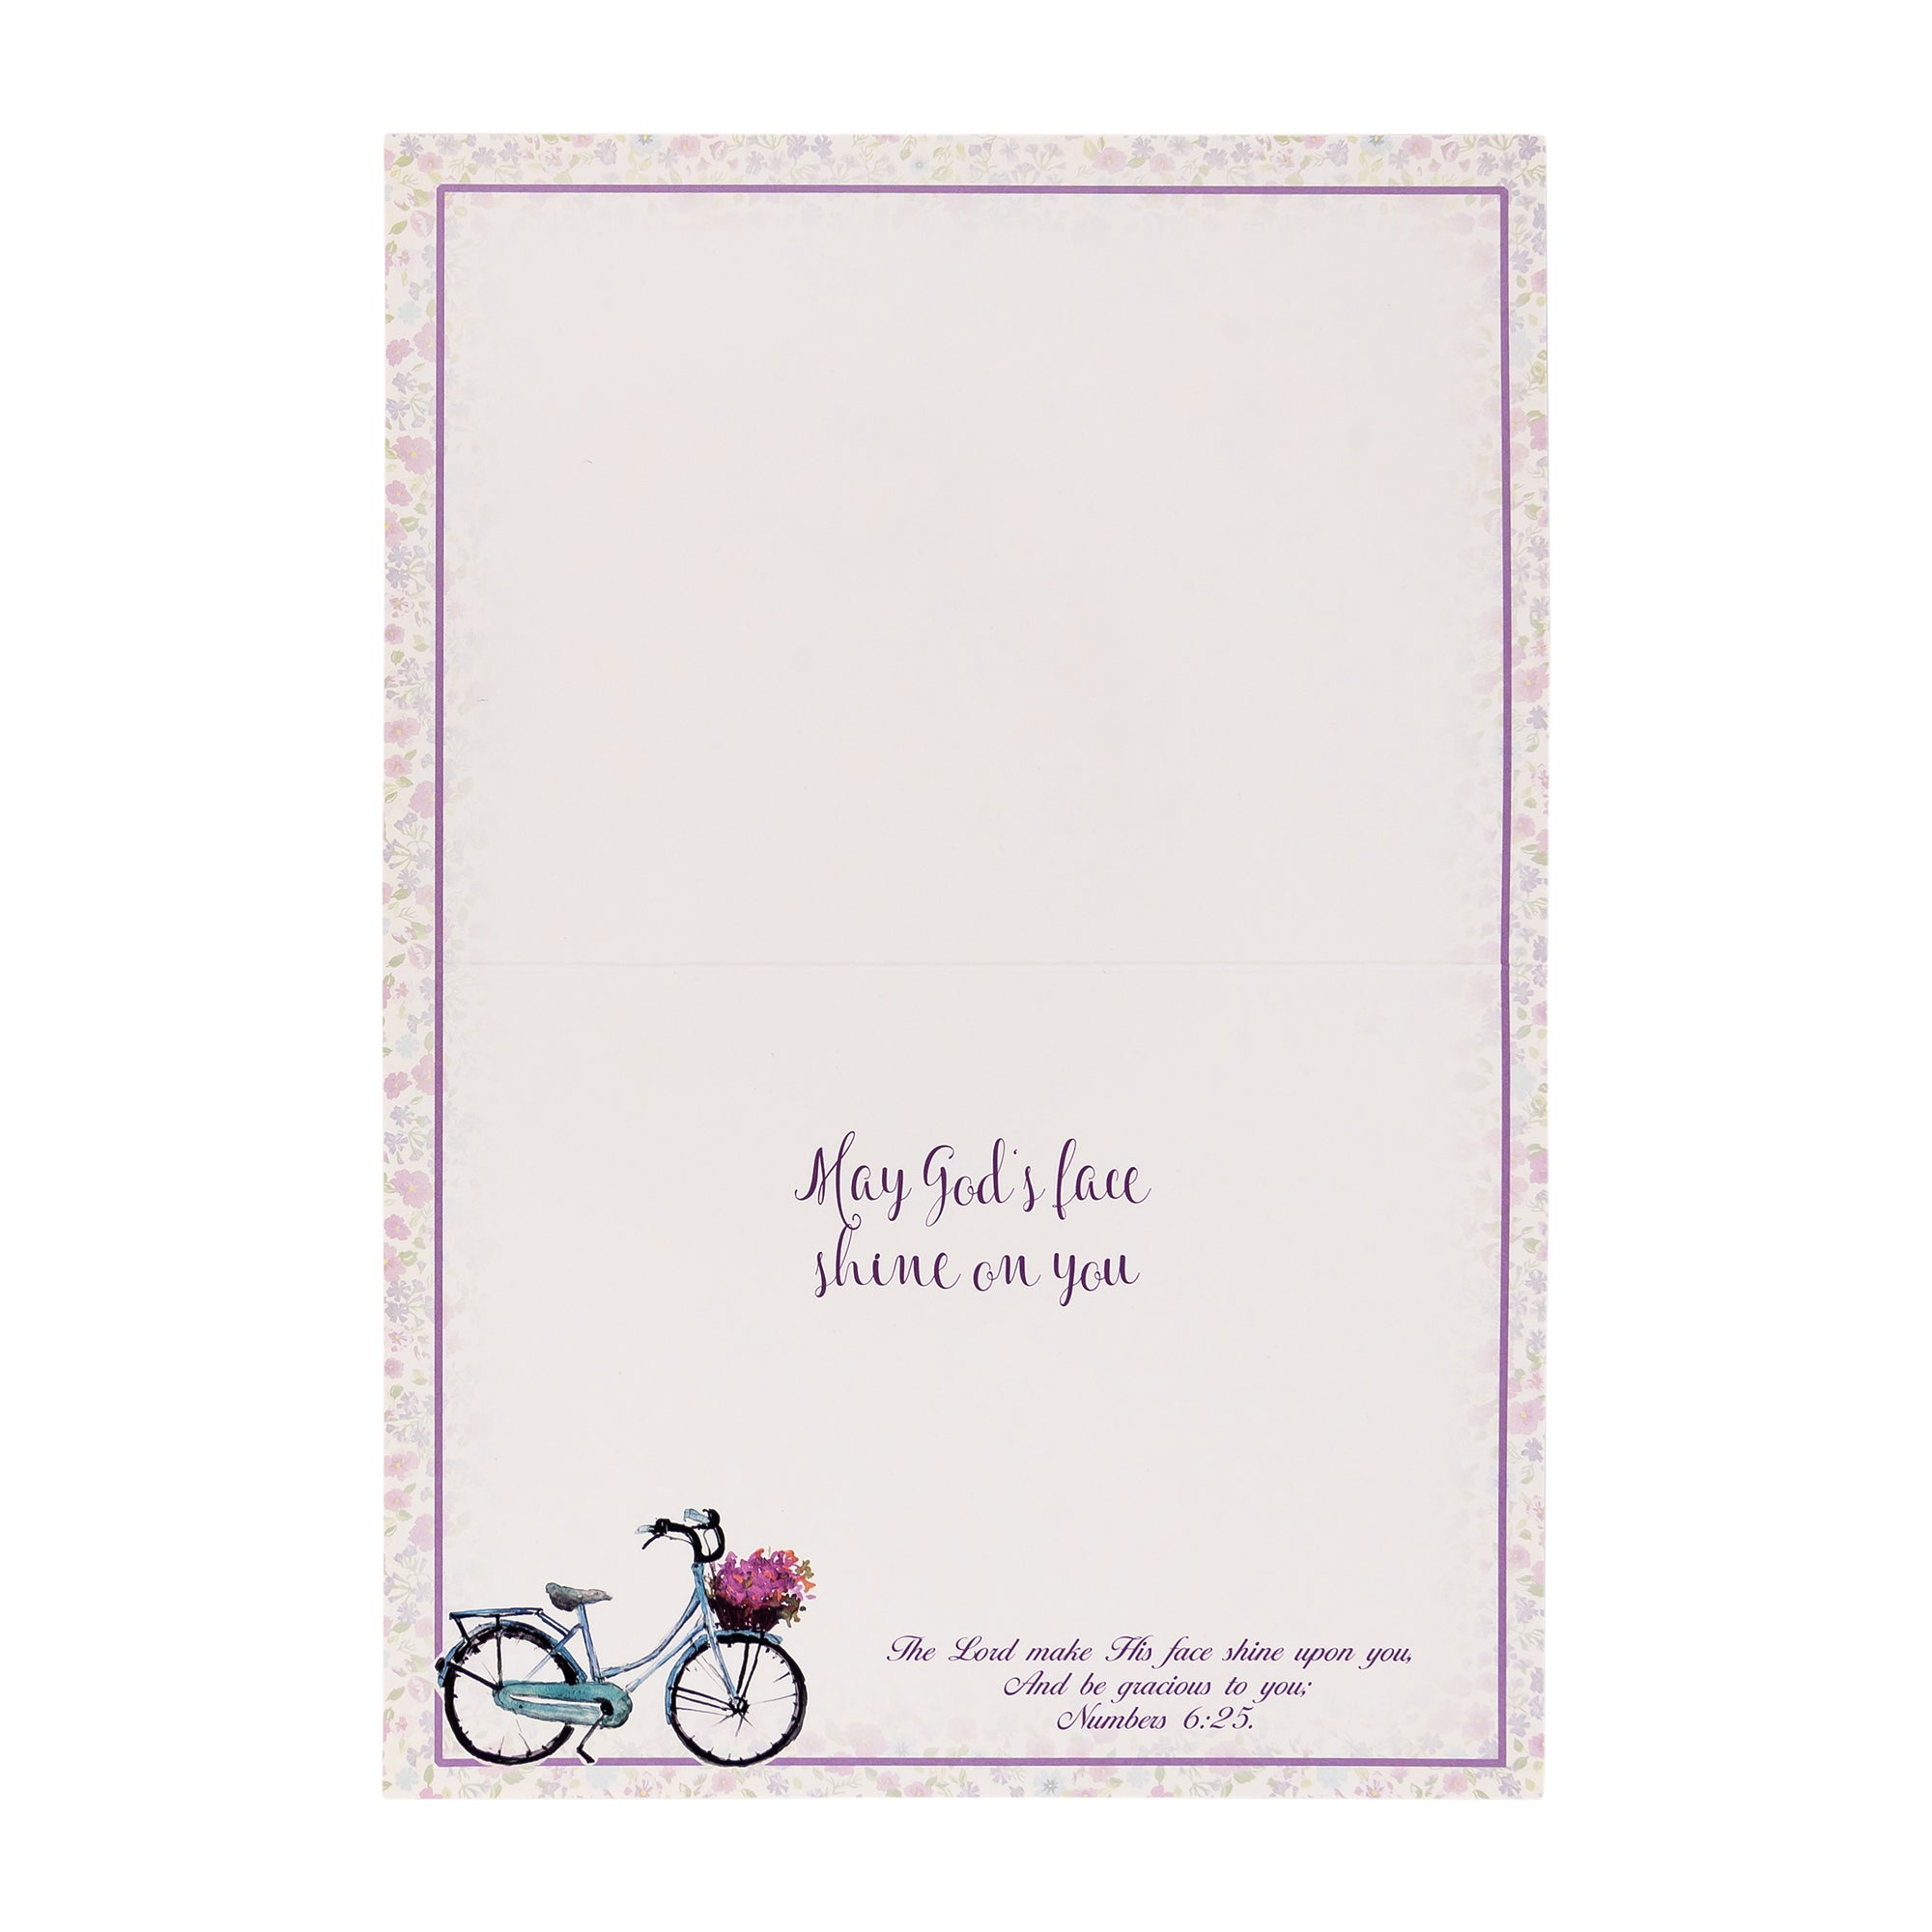 Boxed Cards: Anniversary, Bicycle Assortment